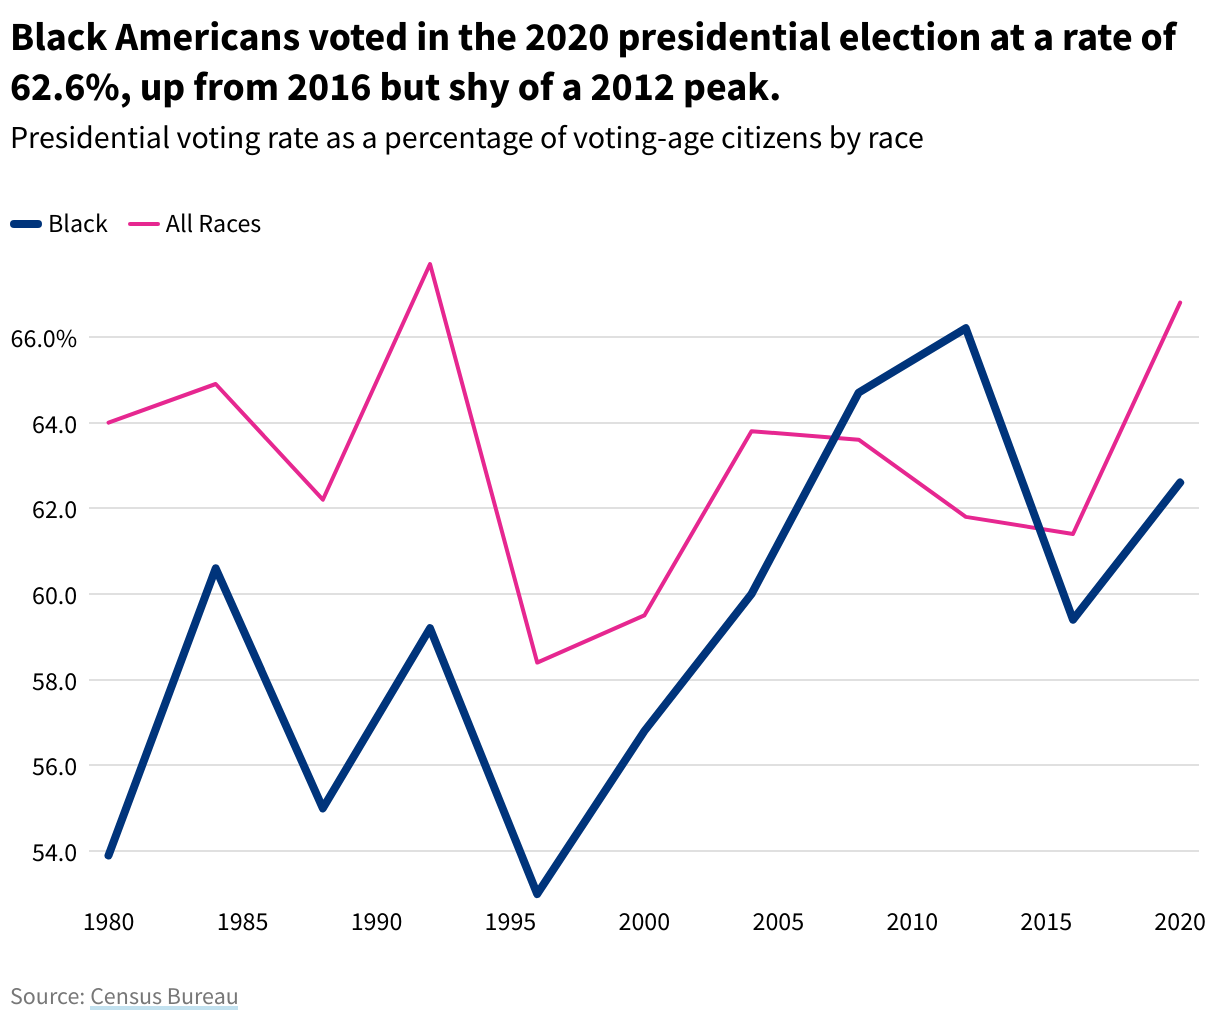 A line chart showing presidential voting rate as a percentage of voting-age citizens by race. Black voting has generally risen since 1996, with a peak in 2012.